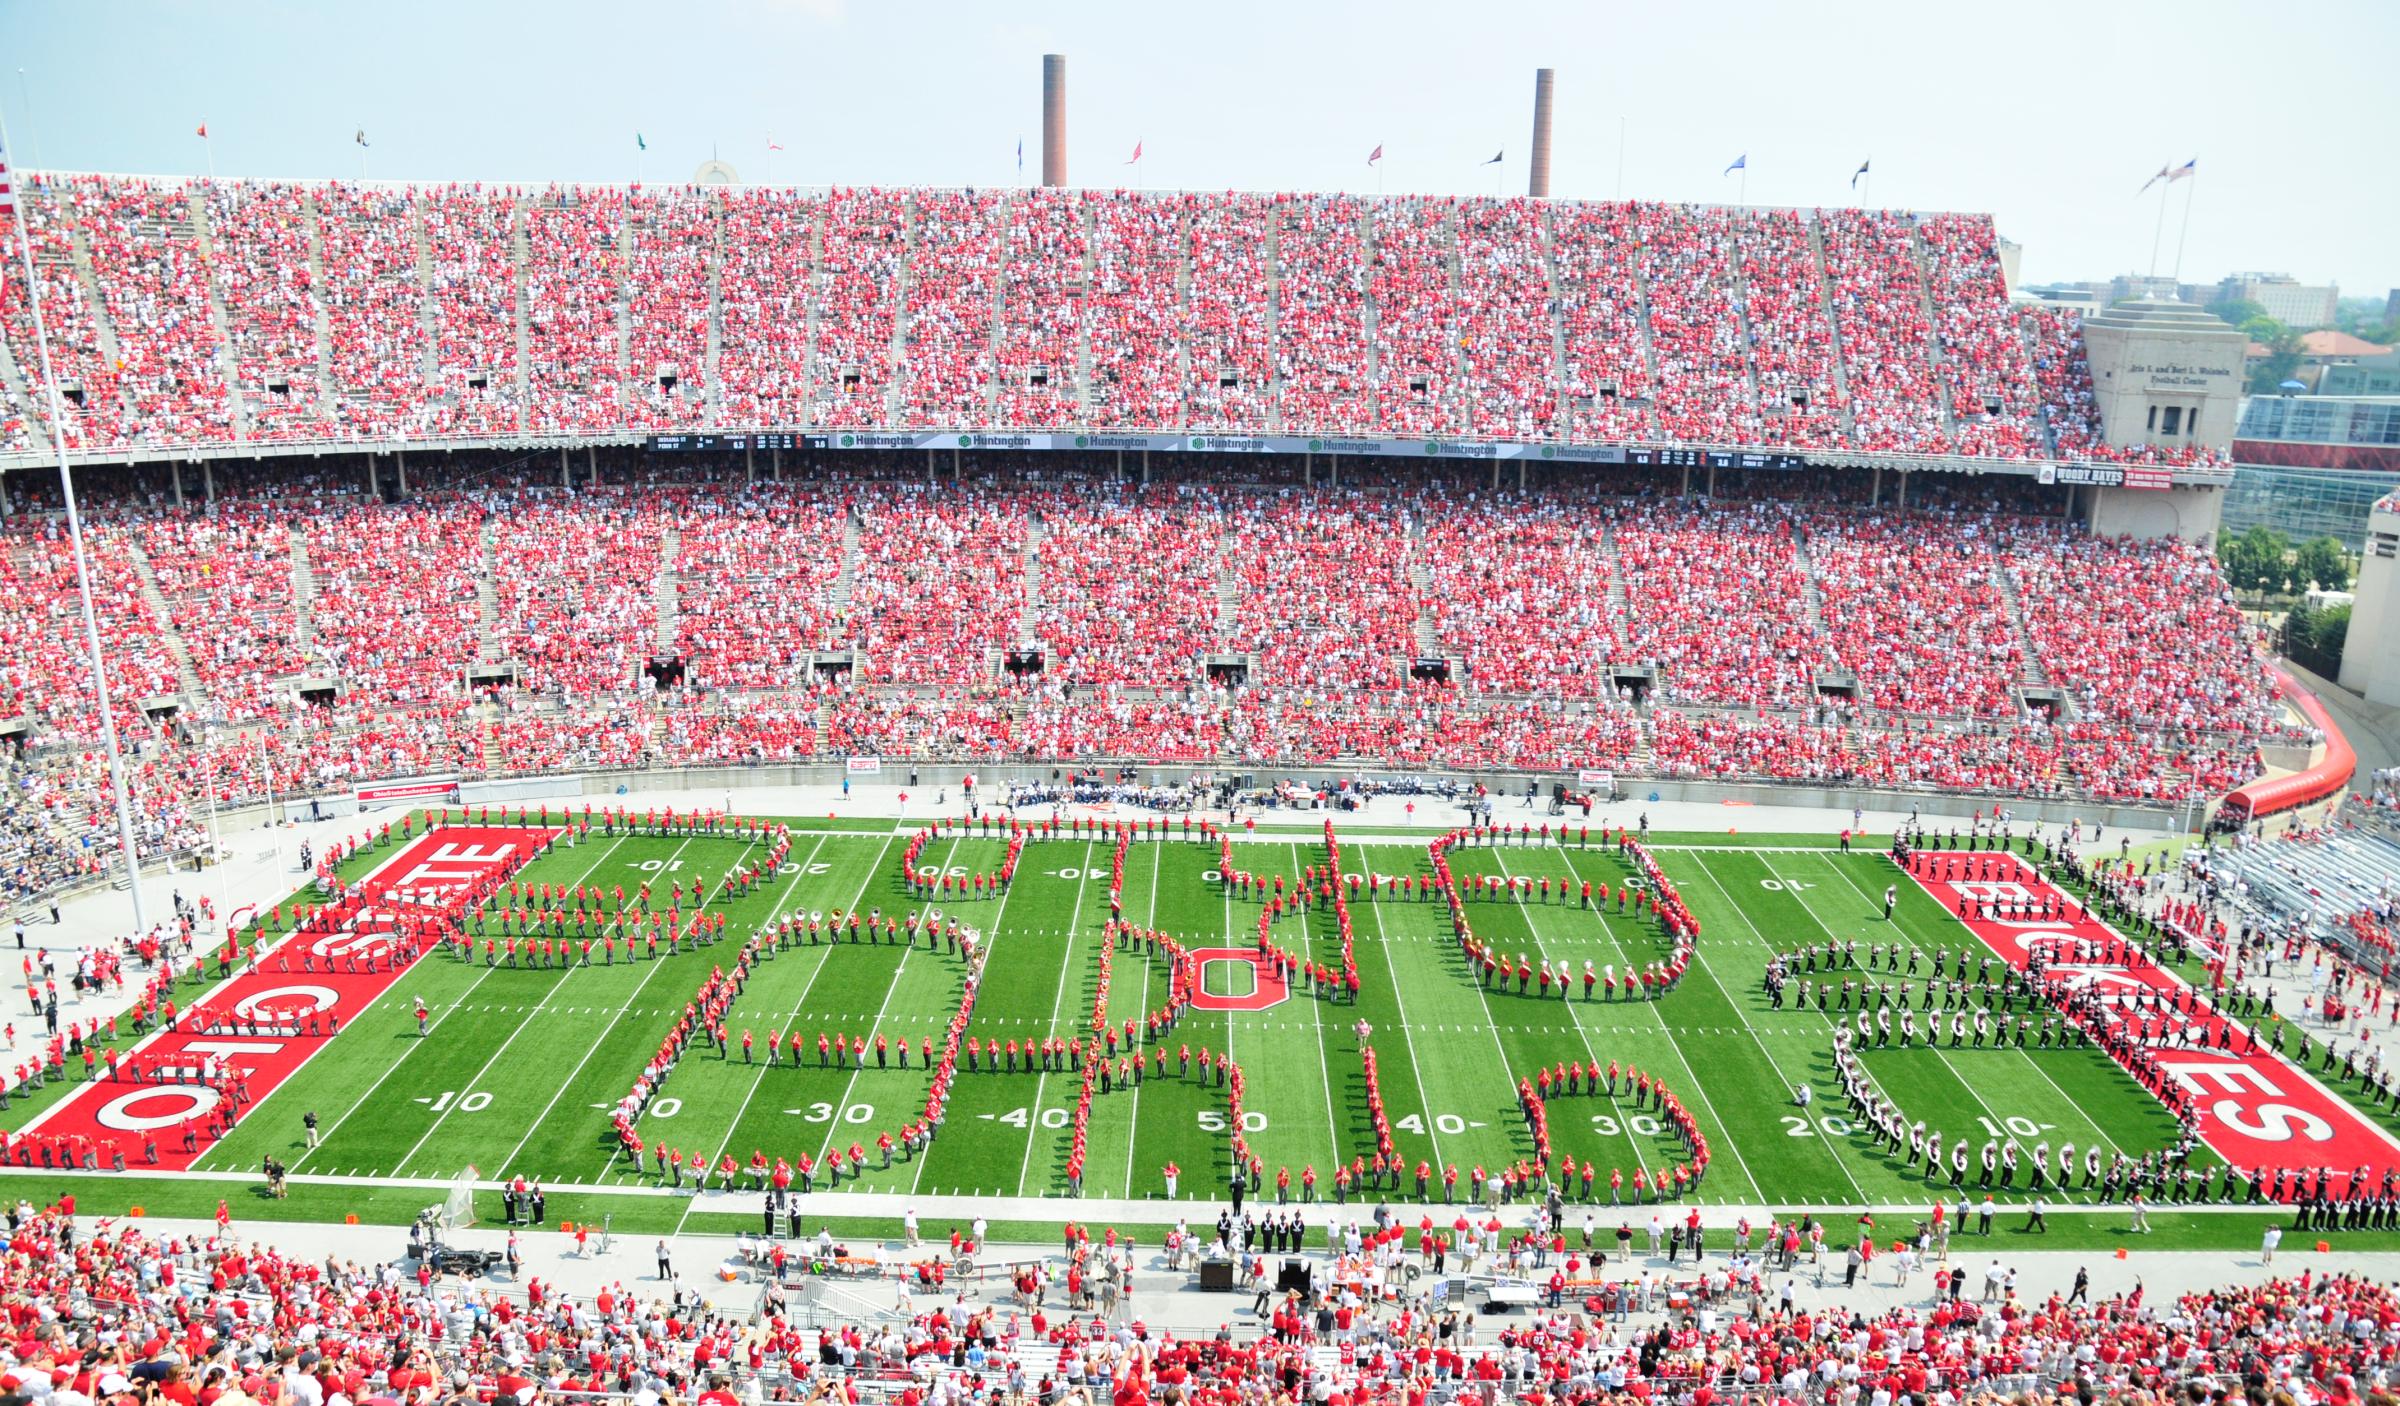 The Ohio State University marching band performs "Script Ohio" during half time during a game with the Akron Zips at Ohio Stadium in Columbus, Ohio on Sept. 3, 2011.